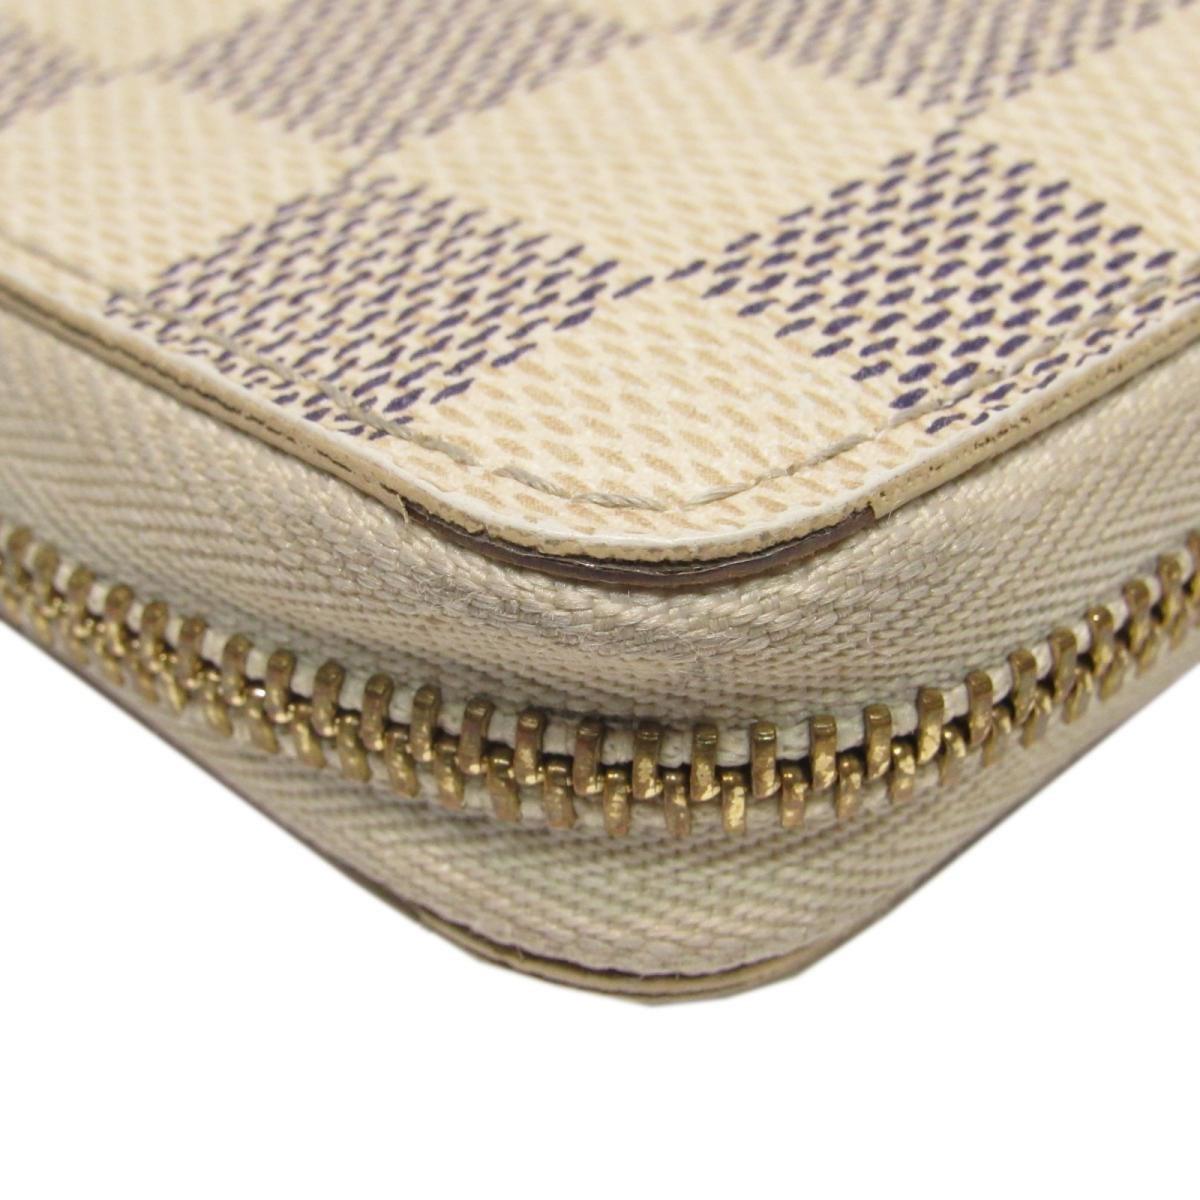 Lyst - Louis Vuitton Authentic Zippy Coin Purse Case N 63069 Damier Azur White Used in White for Men